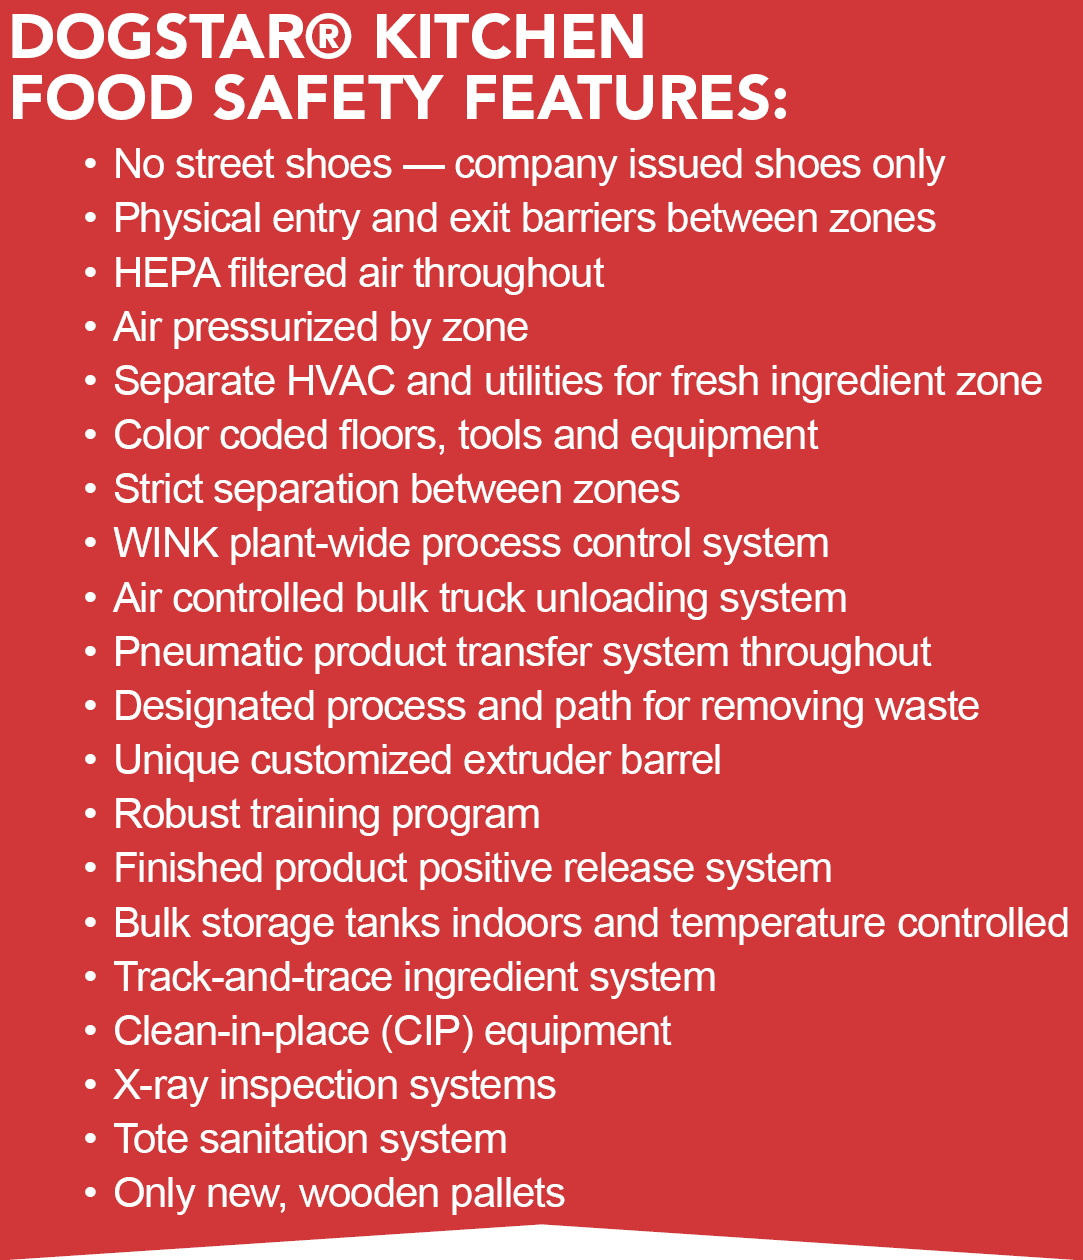 Food safety features at DogStar